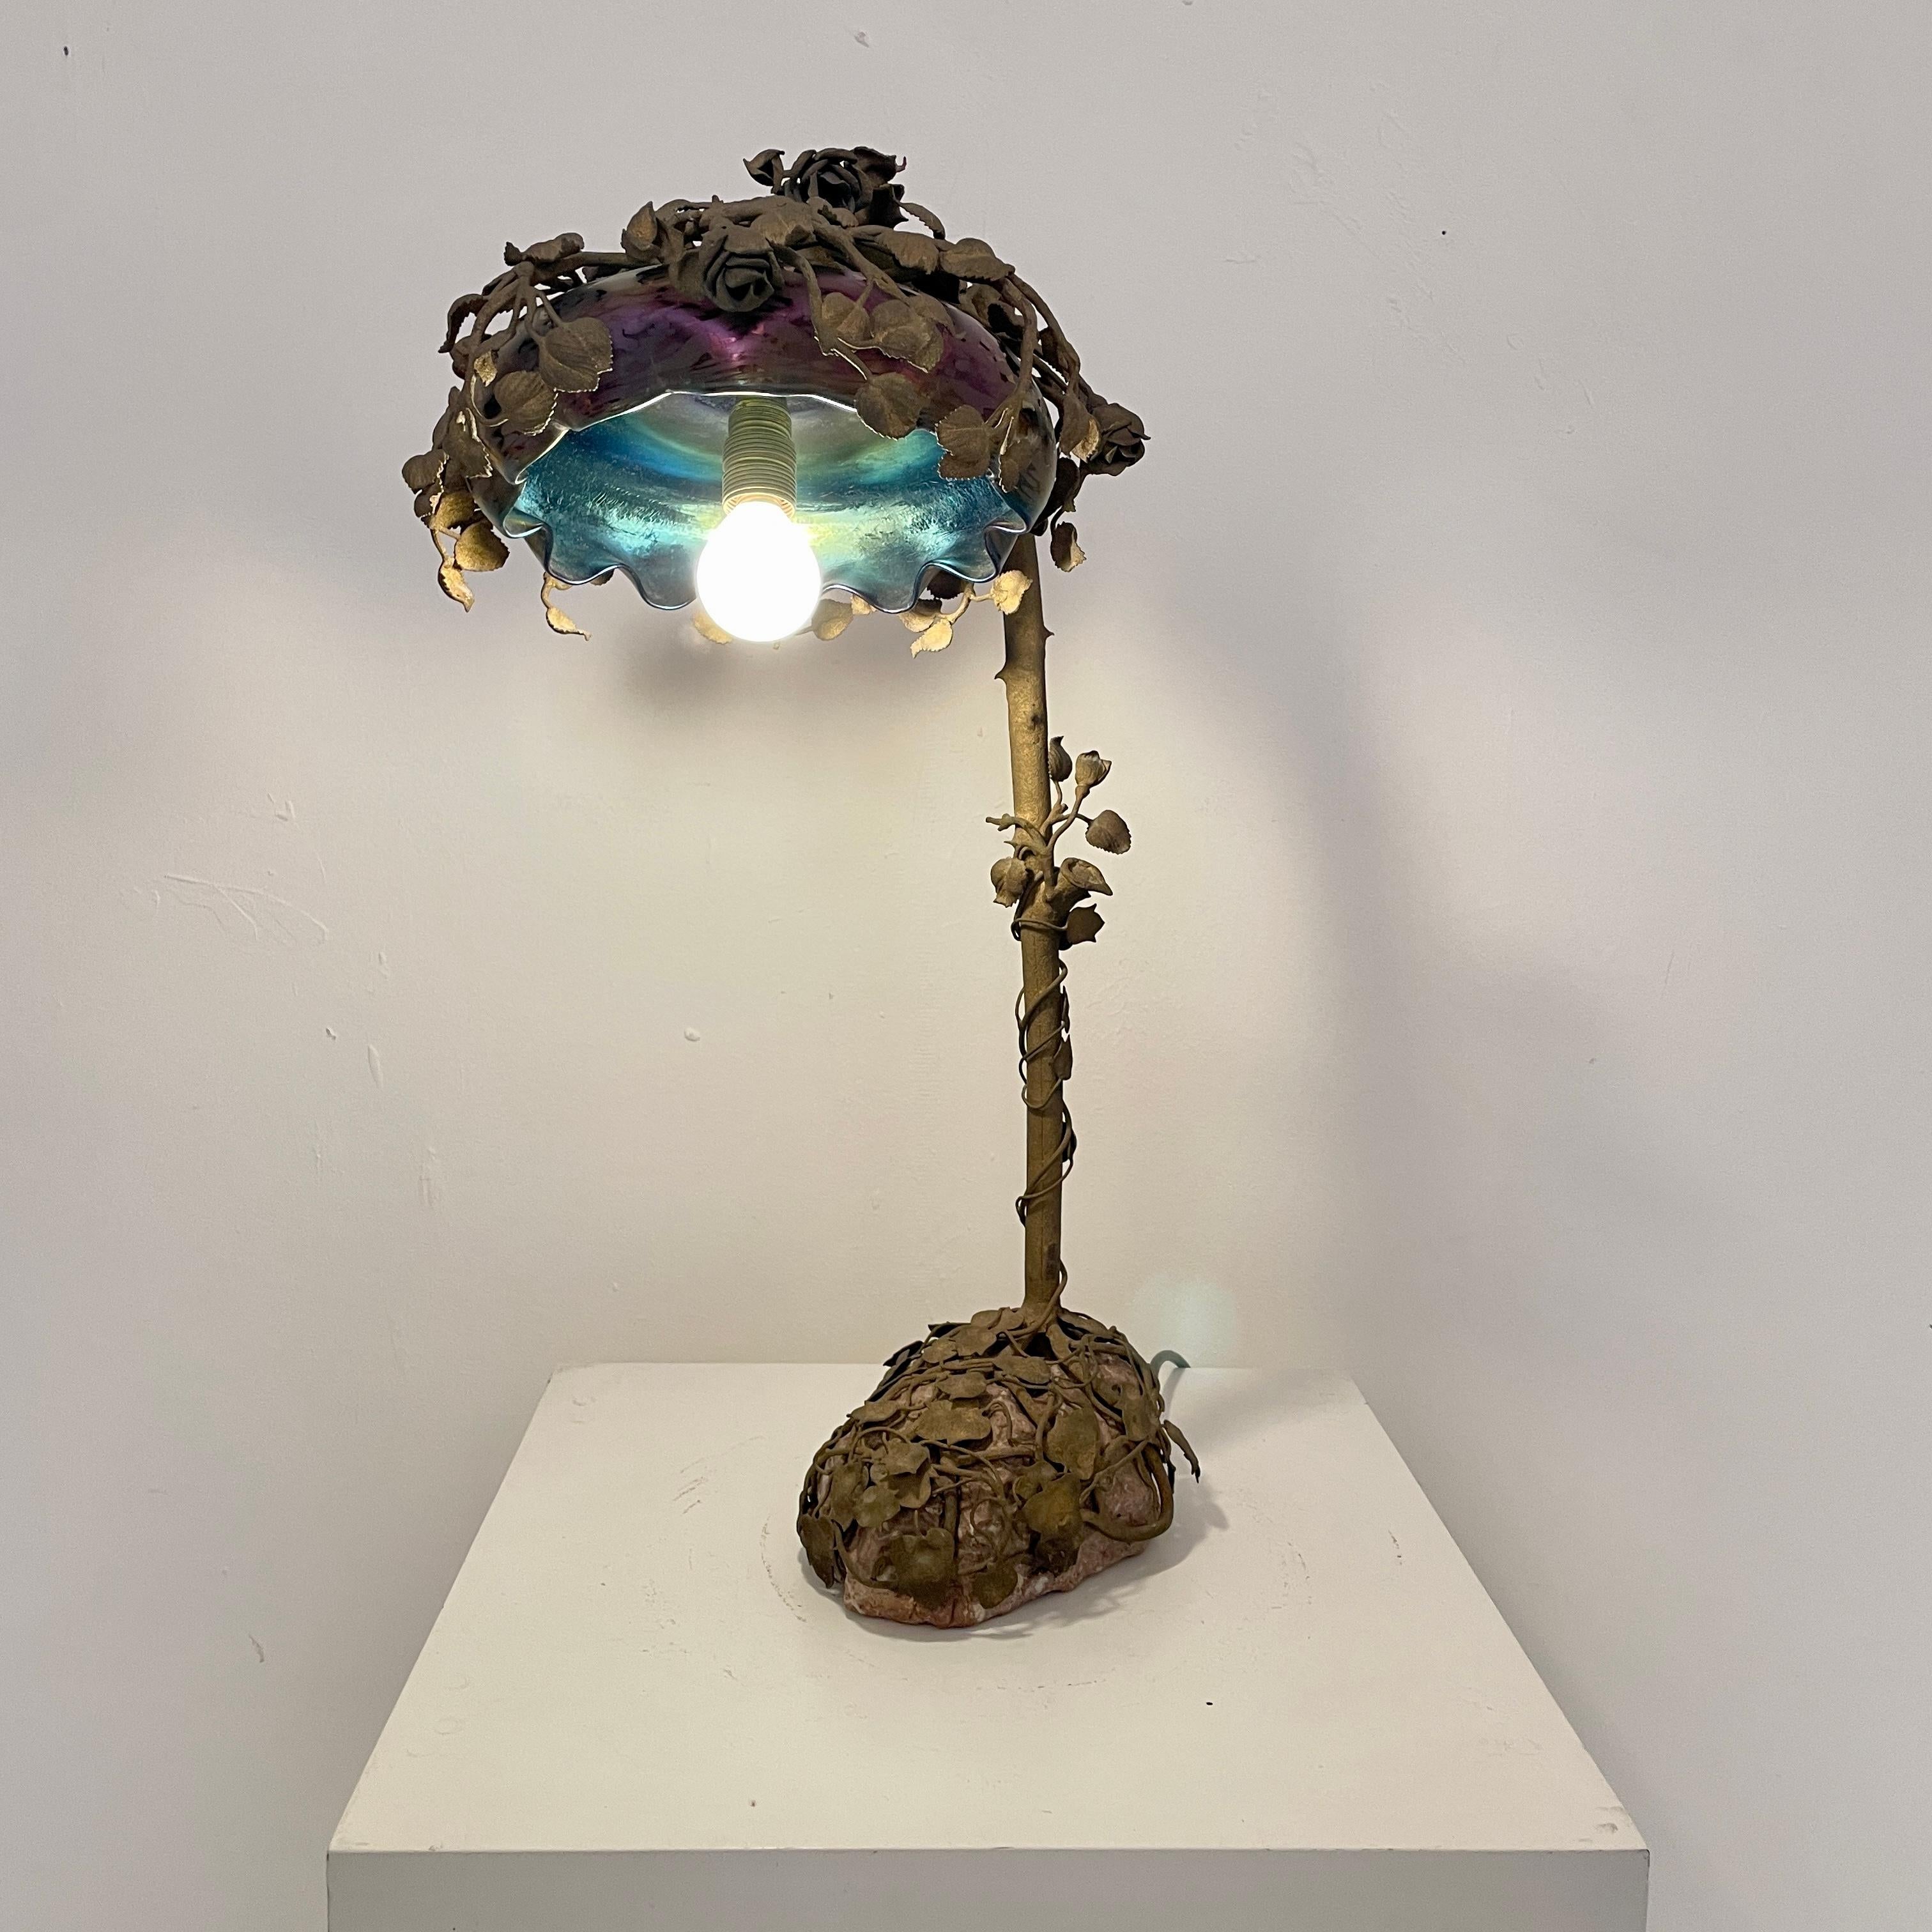 French Art Nouveau Table Lamp Cast Bronze Rose Tree, Enameled Glass, Around 1910 For Sale 5